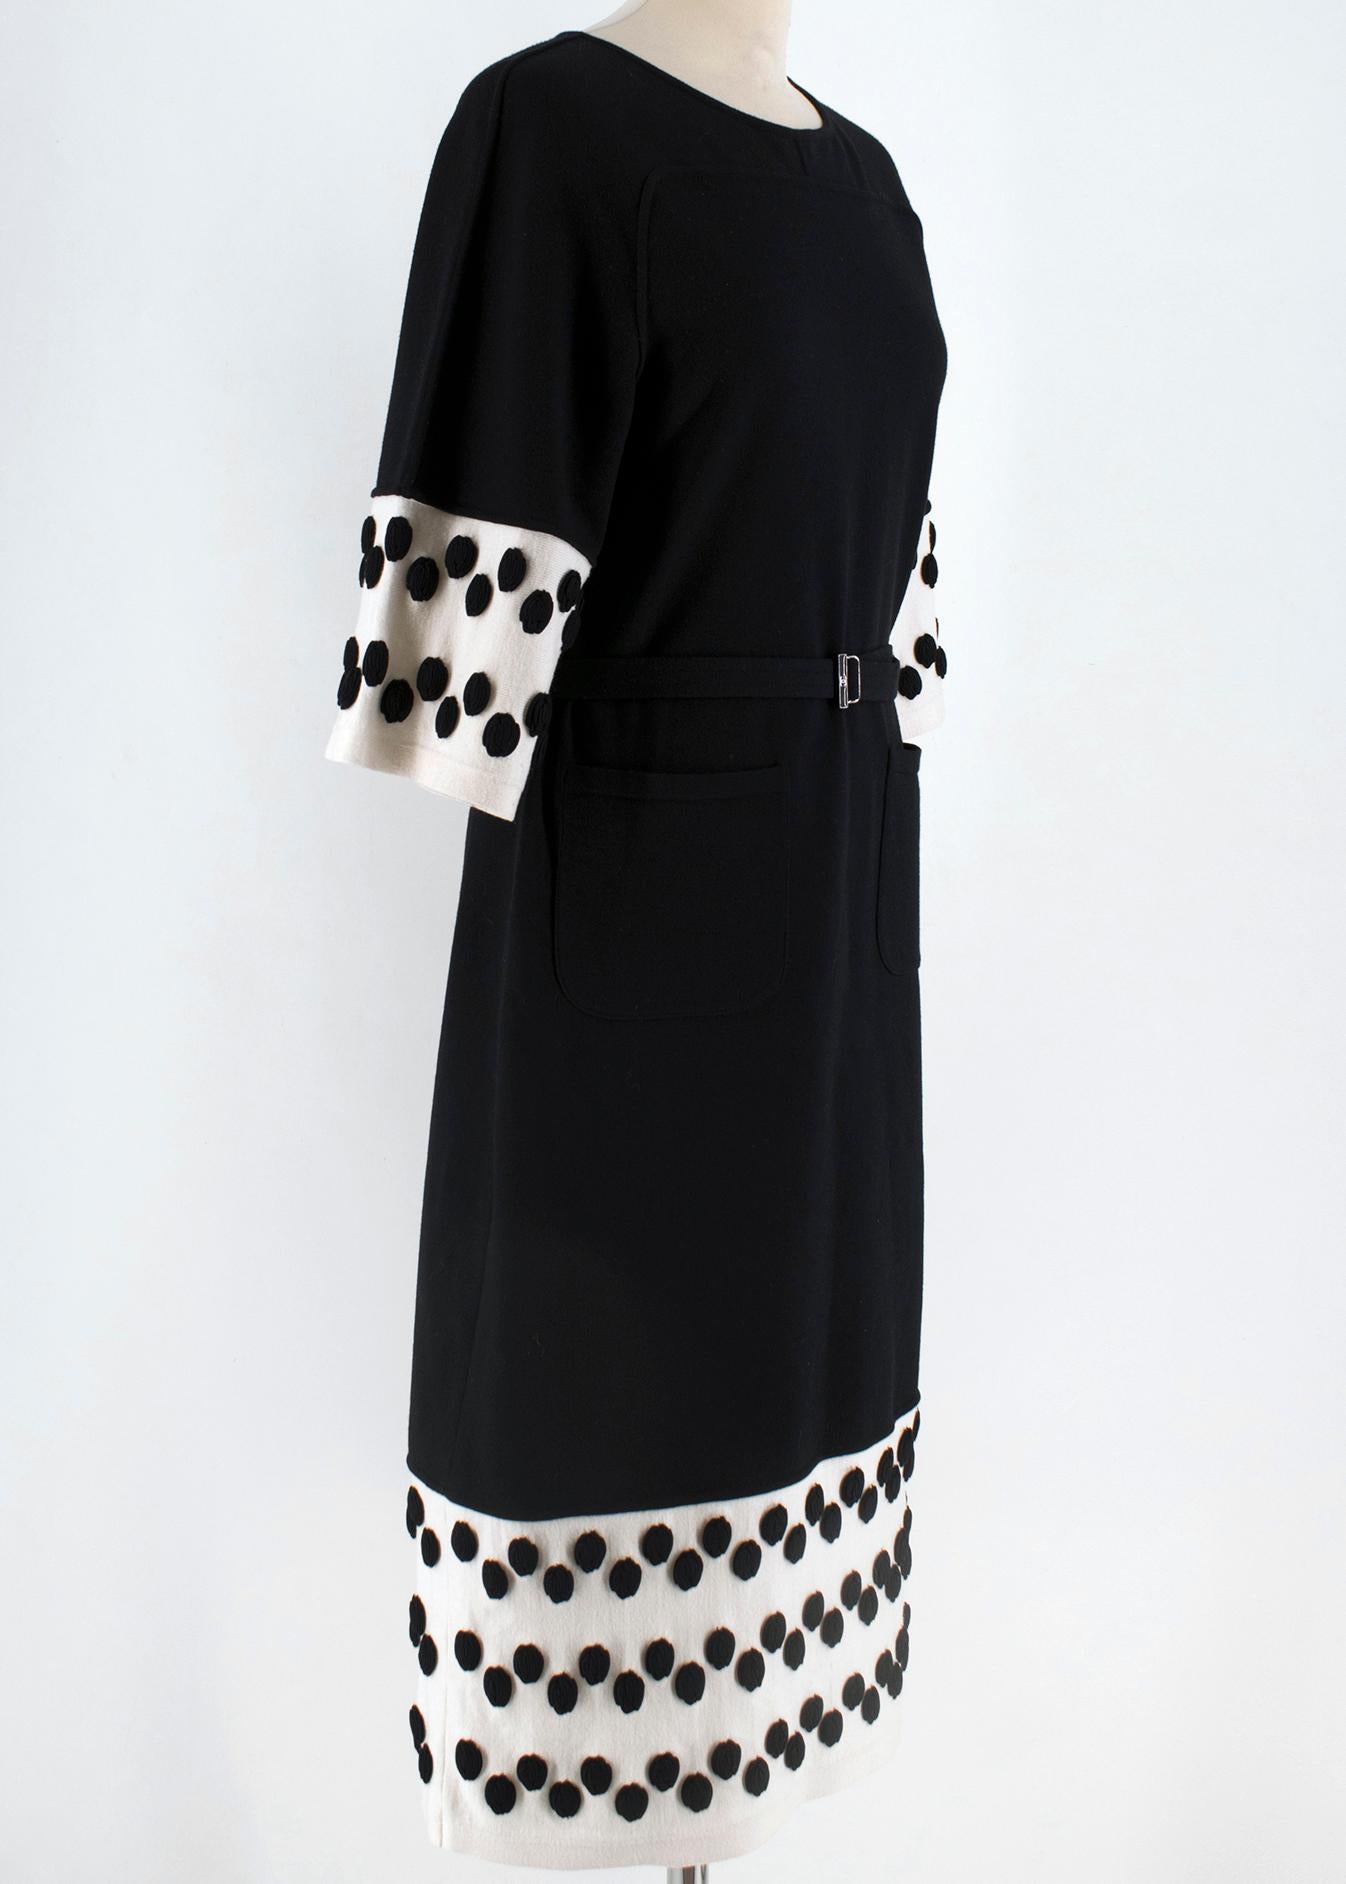 Chanel wool knit dress. The dress features a form-fitting silhouette, white strip at the hem and sleeves, as well as black circular detail on the white trim. There is a detachable belt and two working patch pockets. Made in France. Washing